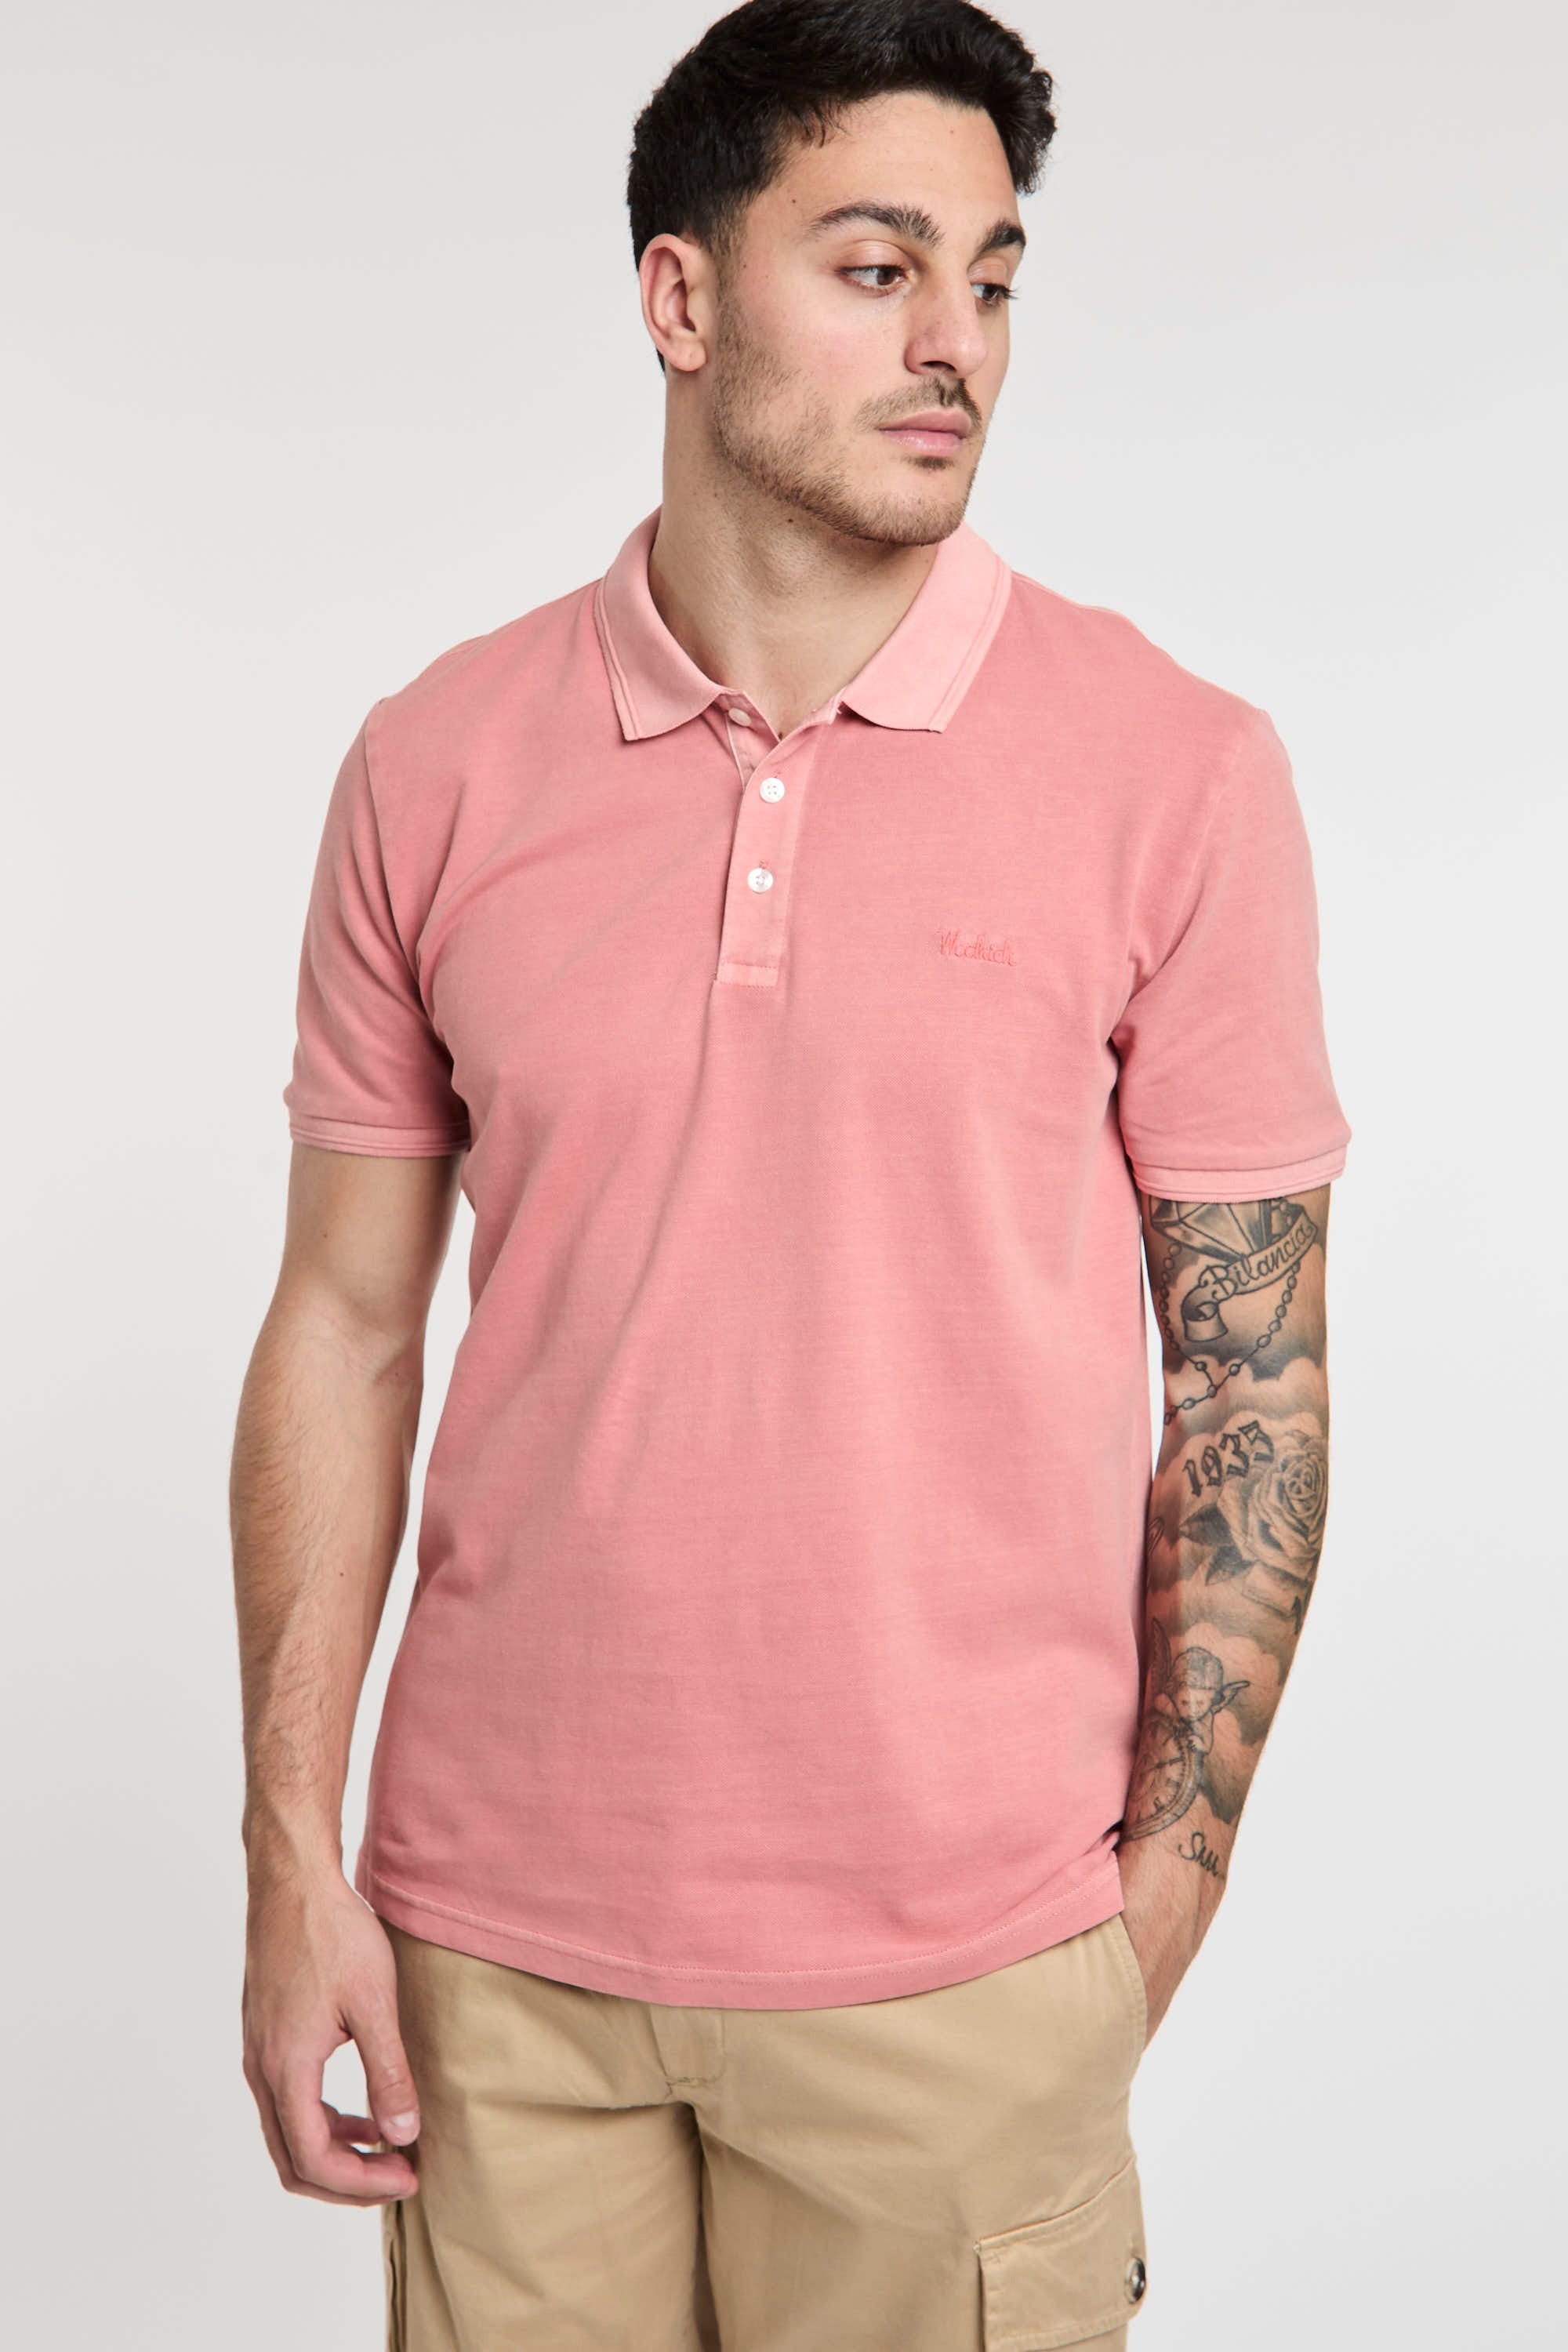 Woolrich Mackinack Stretch Cotton Piqué Polo in Red-3